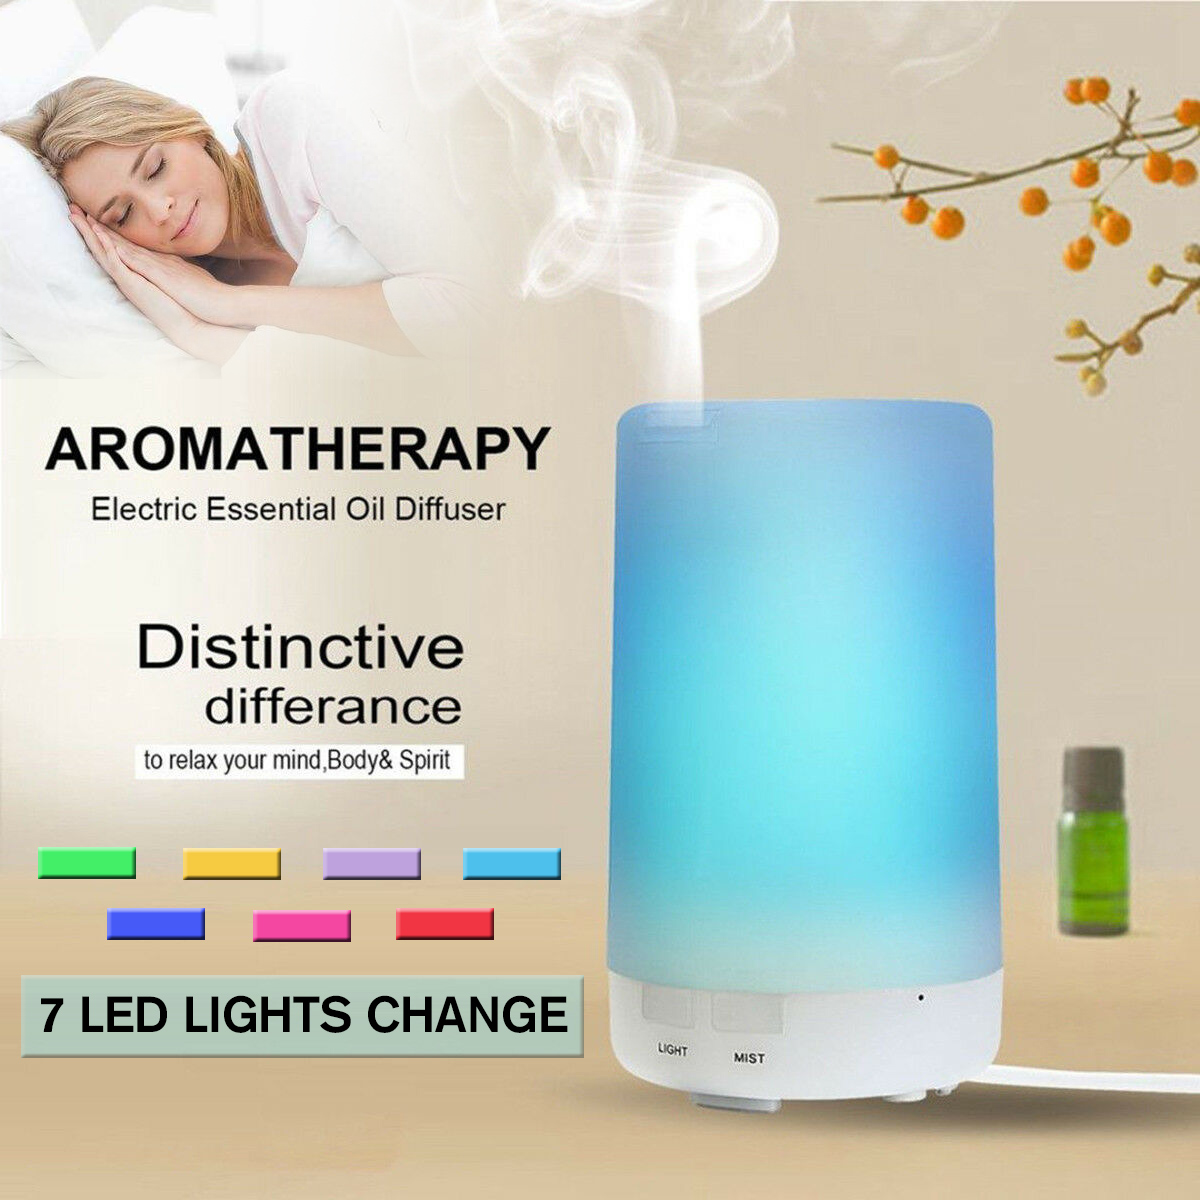 7-LED-Ultrasonic-Aroma-Essential-Diffuser-Air-Humidifier-Purifier-Aromatherapy-Timing-Function-1605103-1